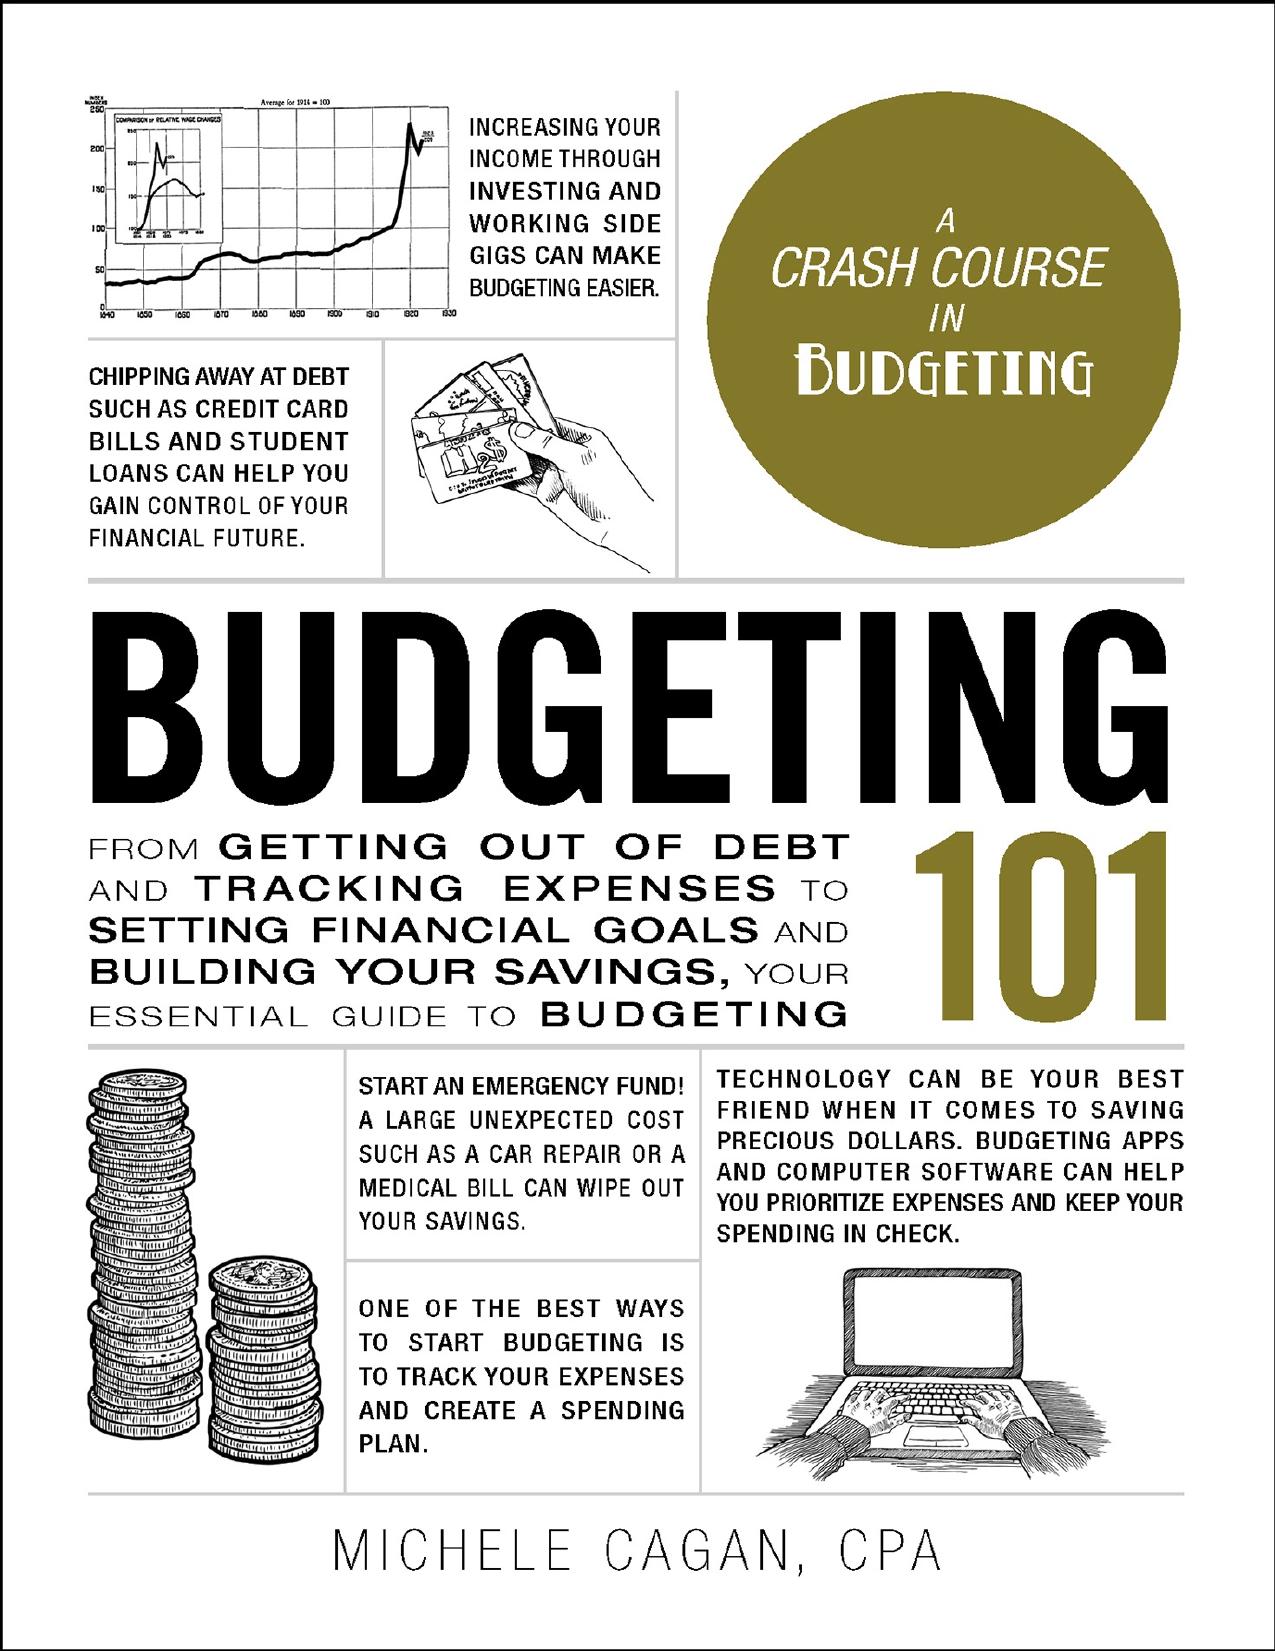 Budgeting 101: From Getting Out of Debt and Tracking Expenses to Setting Financial Goals and Building Your Savings, Your Essential Guide to Budgeting - PDFDrive.com